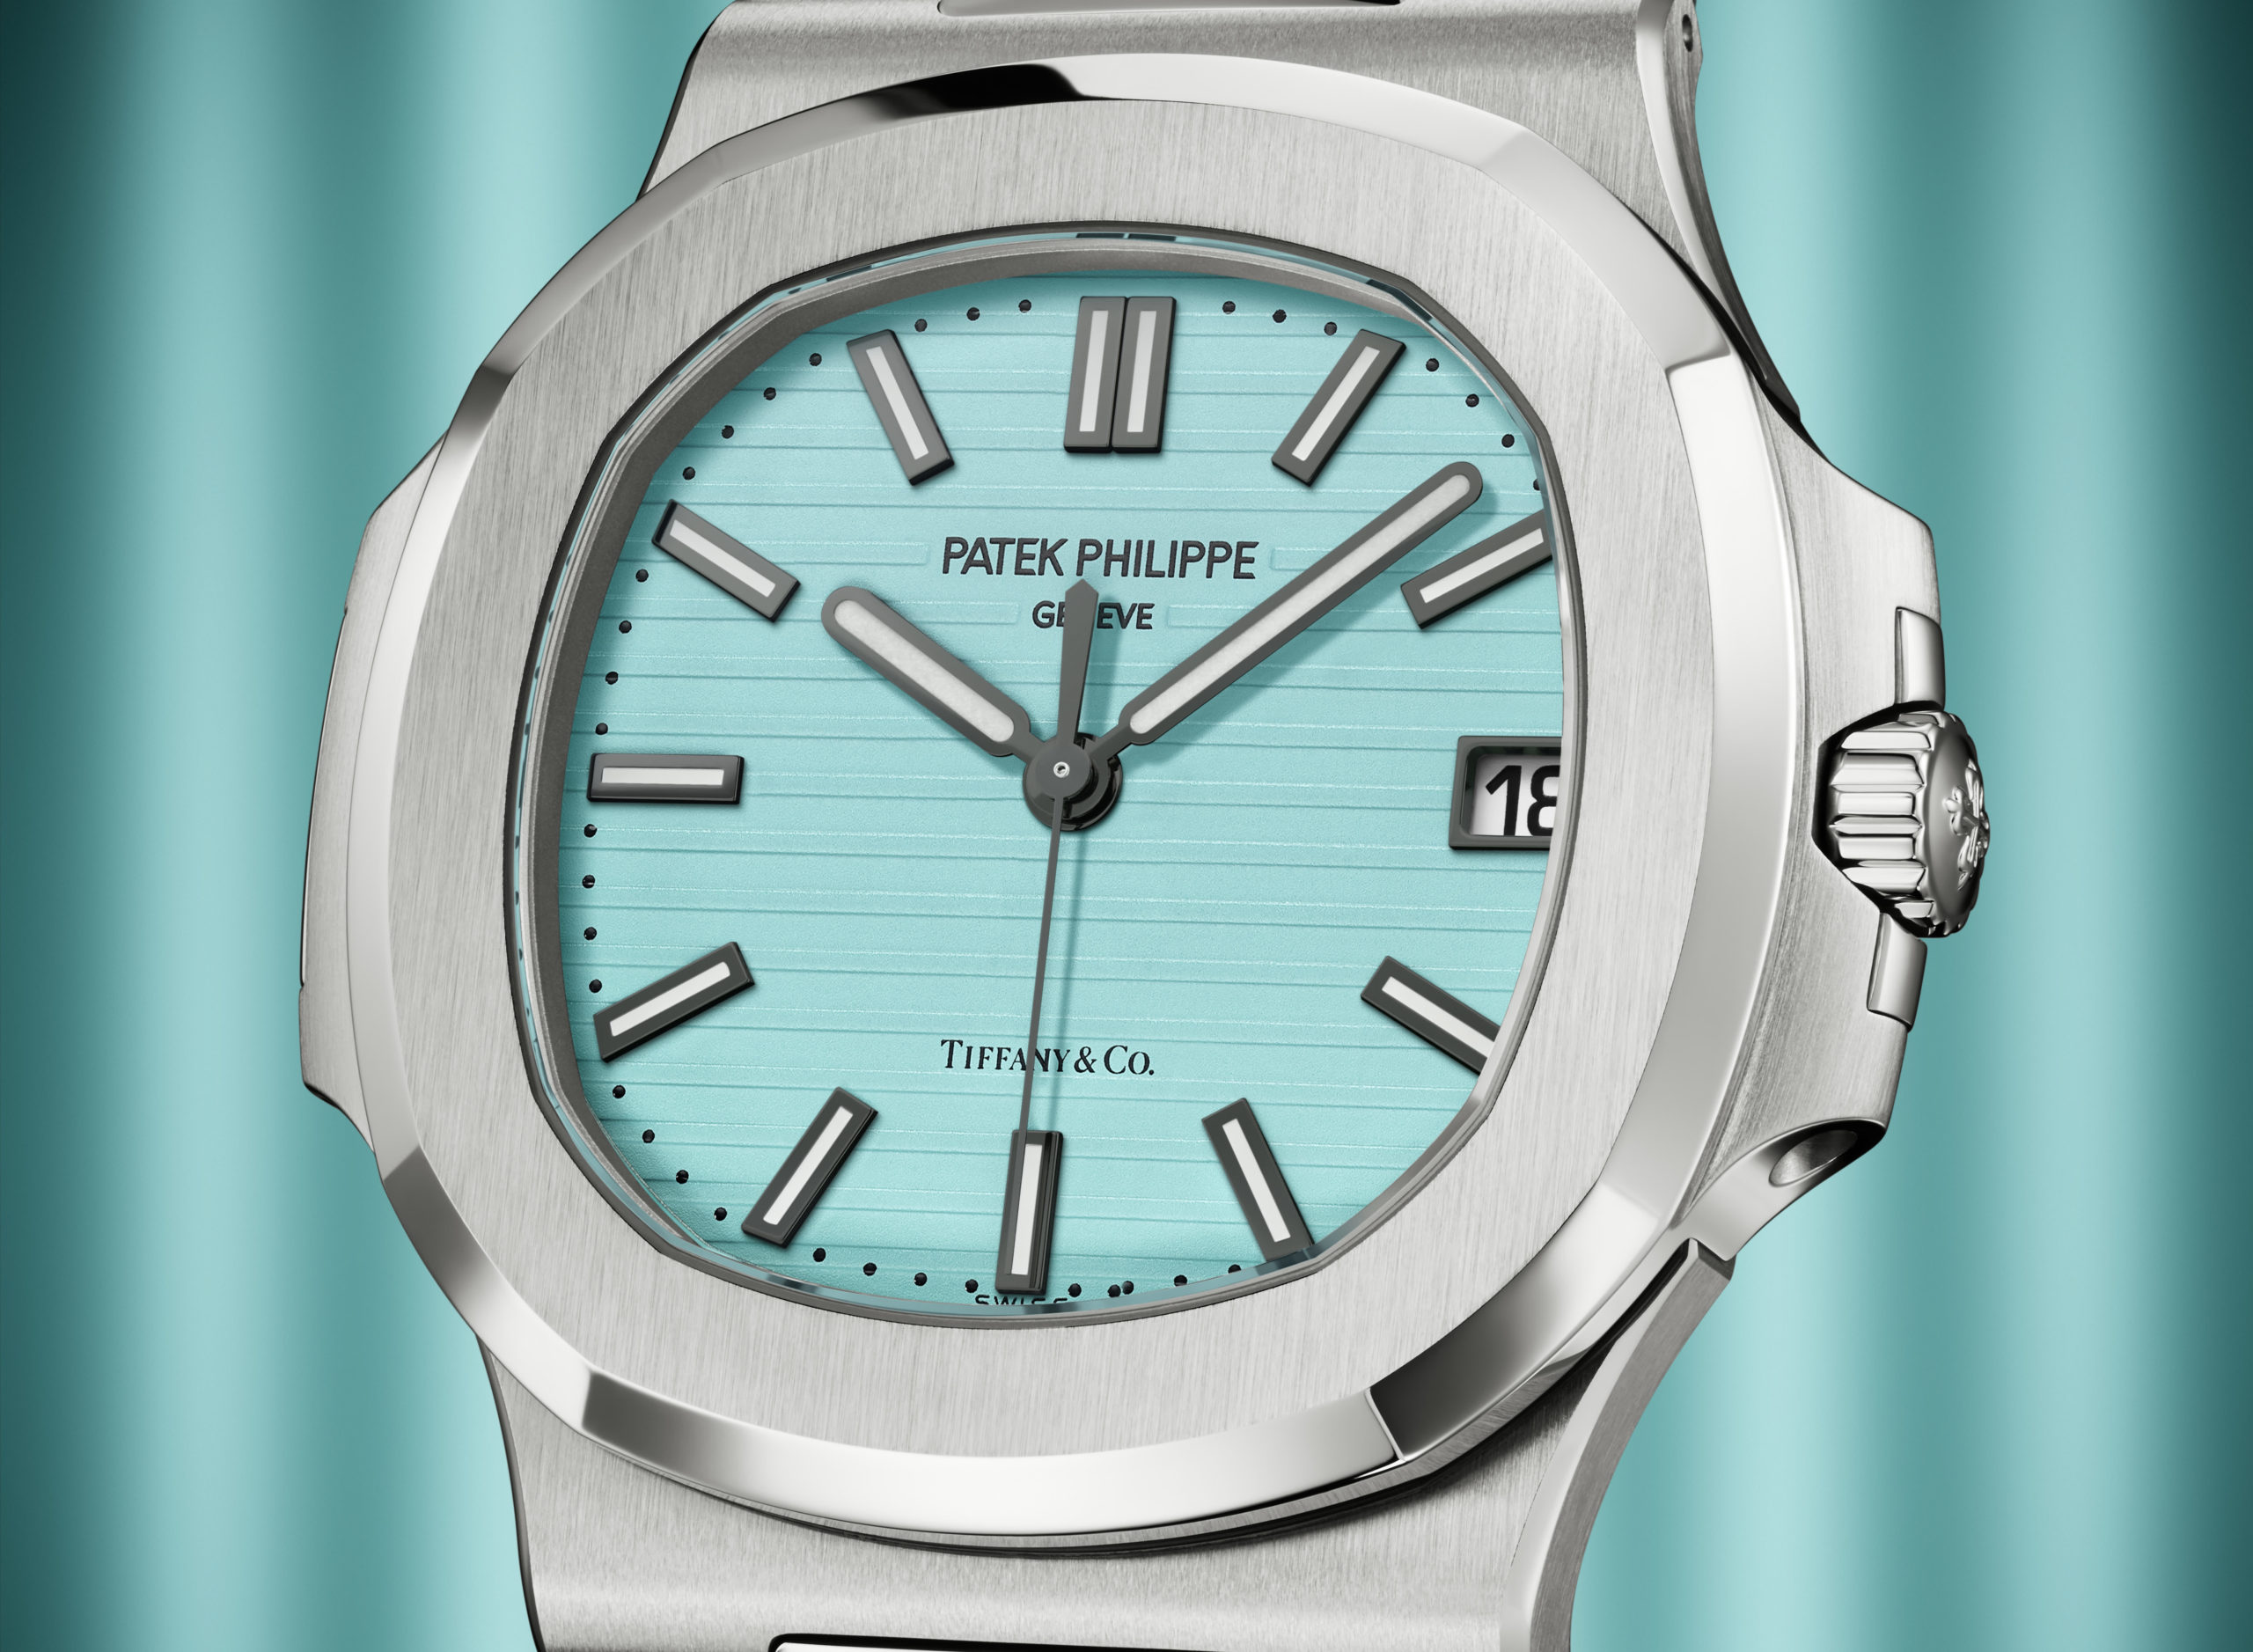 Patek Philippe brings back the ‘holy grail’ of watches for 170 lucky buyers